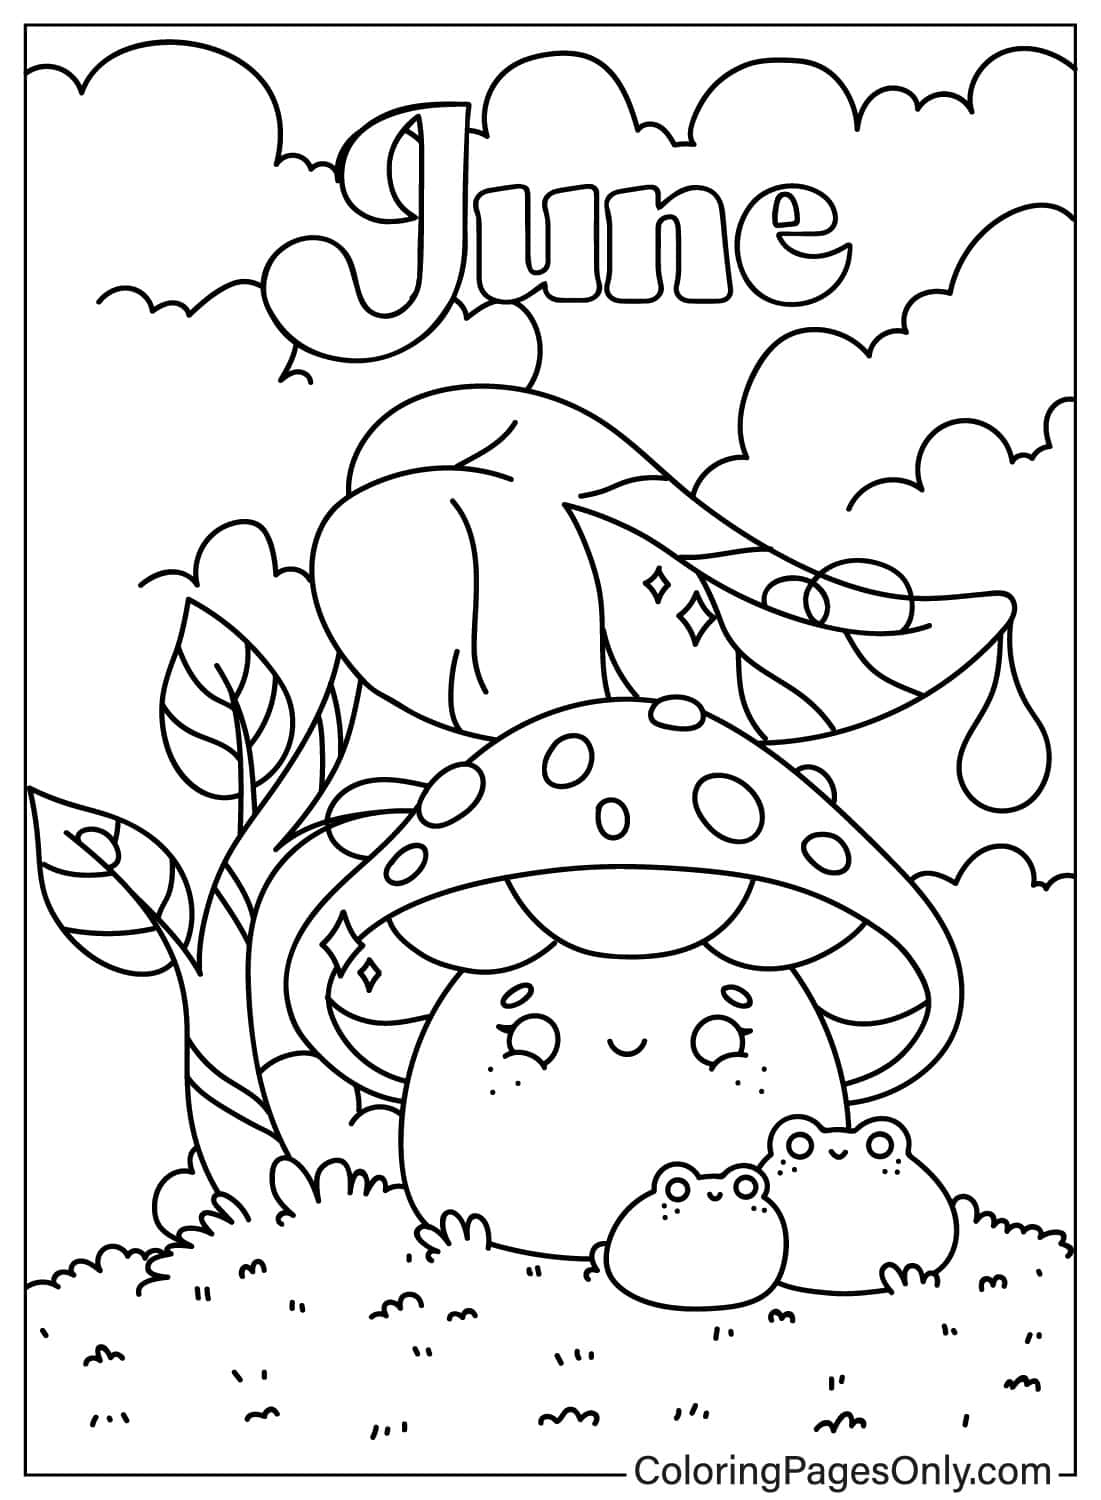 June with Cute Mushrooms and Frogs from June